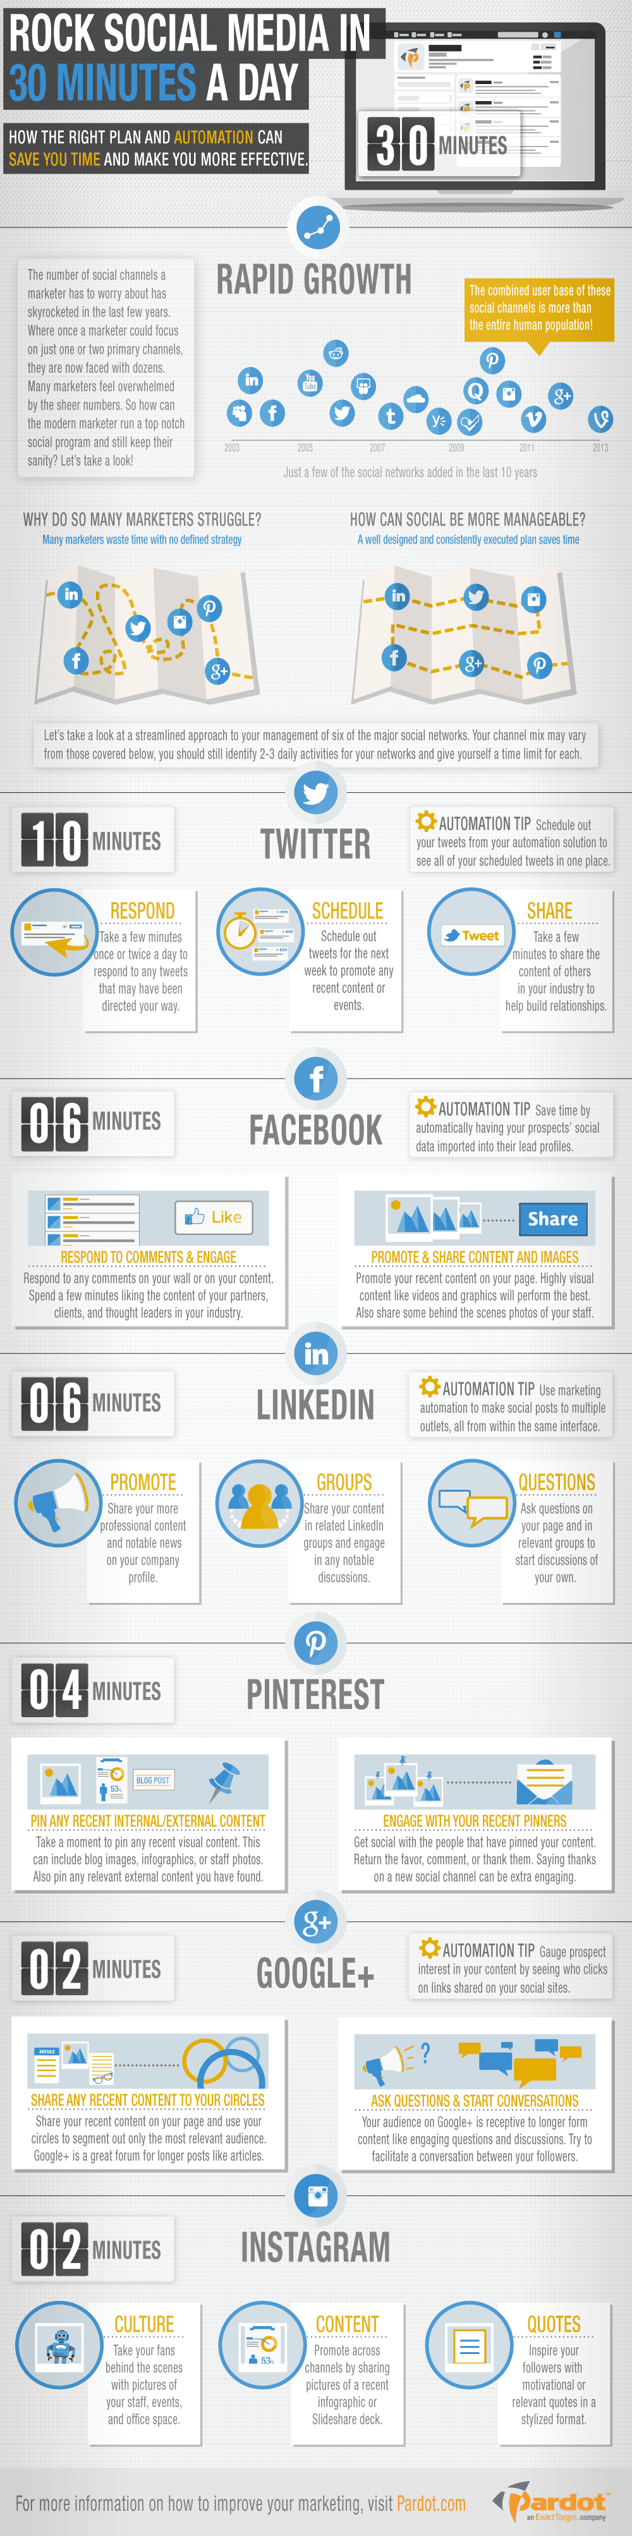 social-media-marketing-done-30-minutes-infographic-image-compressed.png